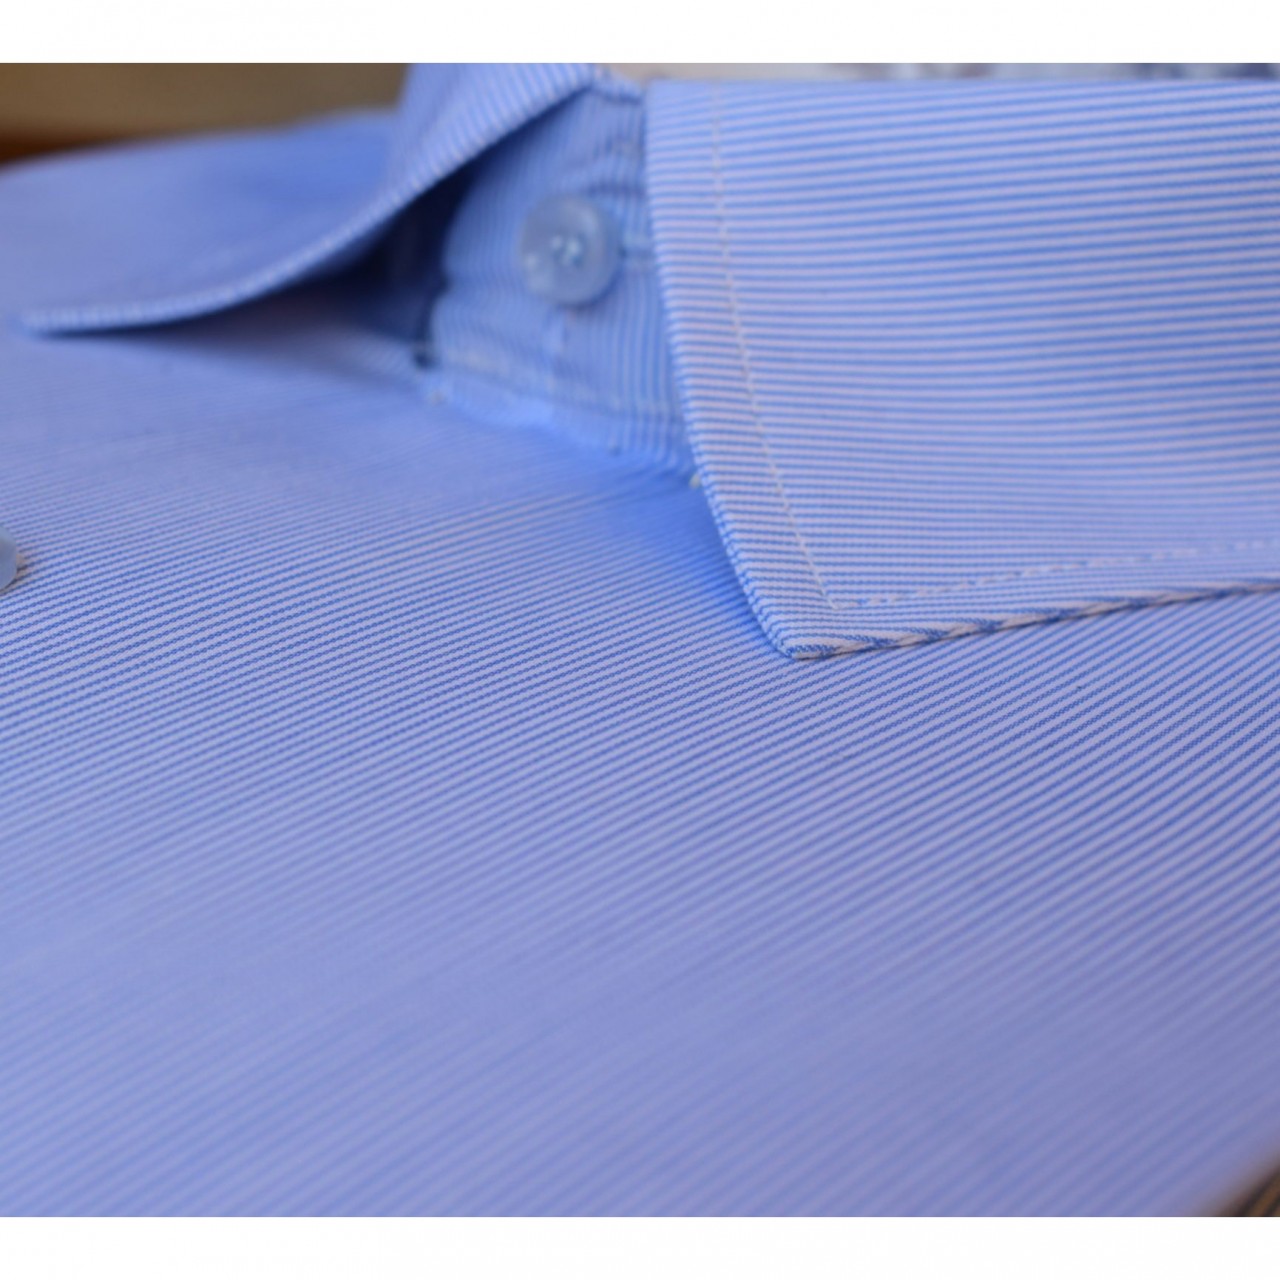 Pin Stripes Formal Shirt For Men - Double Needle Stitching - Sky Blue